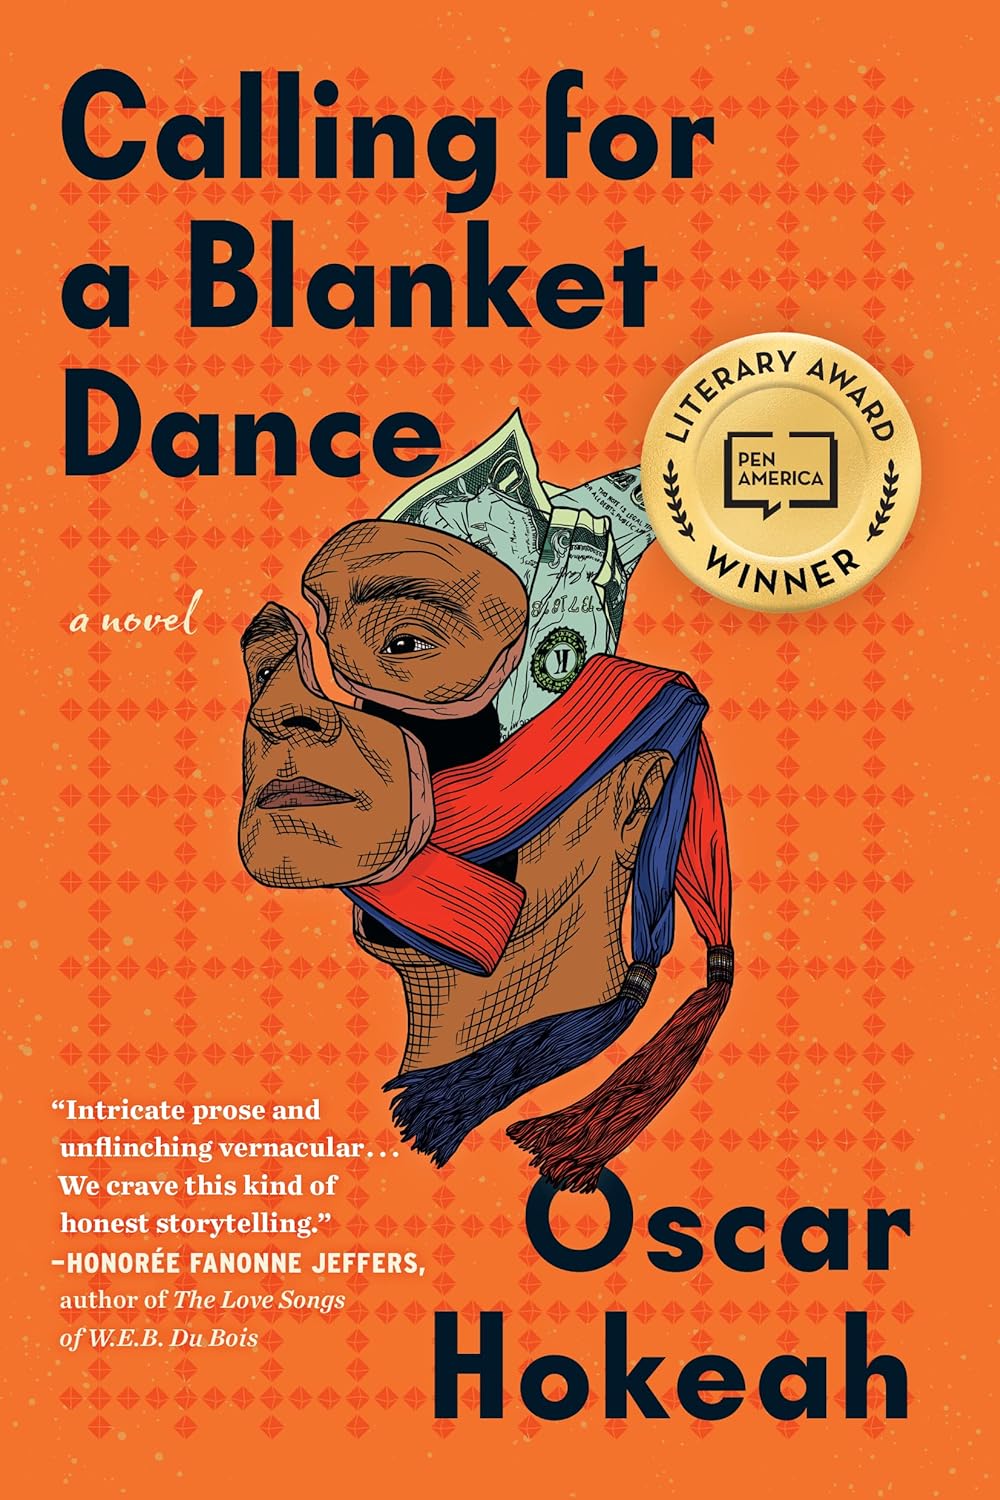 Graphic image of the book cover for Calling for a Blanket Dance